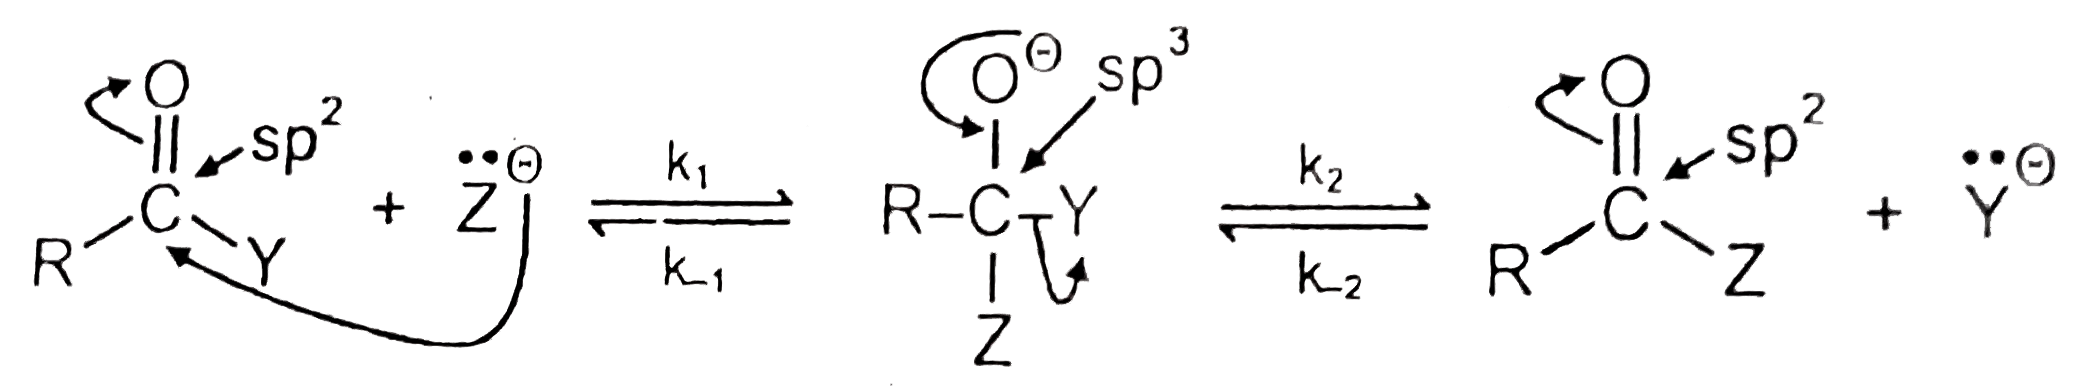 When a nucleophile attach te carbonyl group of a carboxylic acid deriative, the carbon-oxygen pi- bond breaks. The resulting intermediate is called a tetrahedral inntermediuate because sp^(2) carbon in the reactant has become a tetrahedral (sp^(3)) carbon in the intermediate.   Here overset(..)Y^(ɵ) is leaving gourp, the weaker base is expelled preferentially.   Q. Consider the following reaction:   CH(3)-underset(O^(18))underset(||)C-overset(18)C^(ɵ)   (2). CH(3)-underset(O)underset(||)C-C^(ɵ)   (3). CH(3)CH(2)OH   (4). CH(3)CH(2)overset(18)(O)H